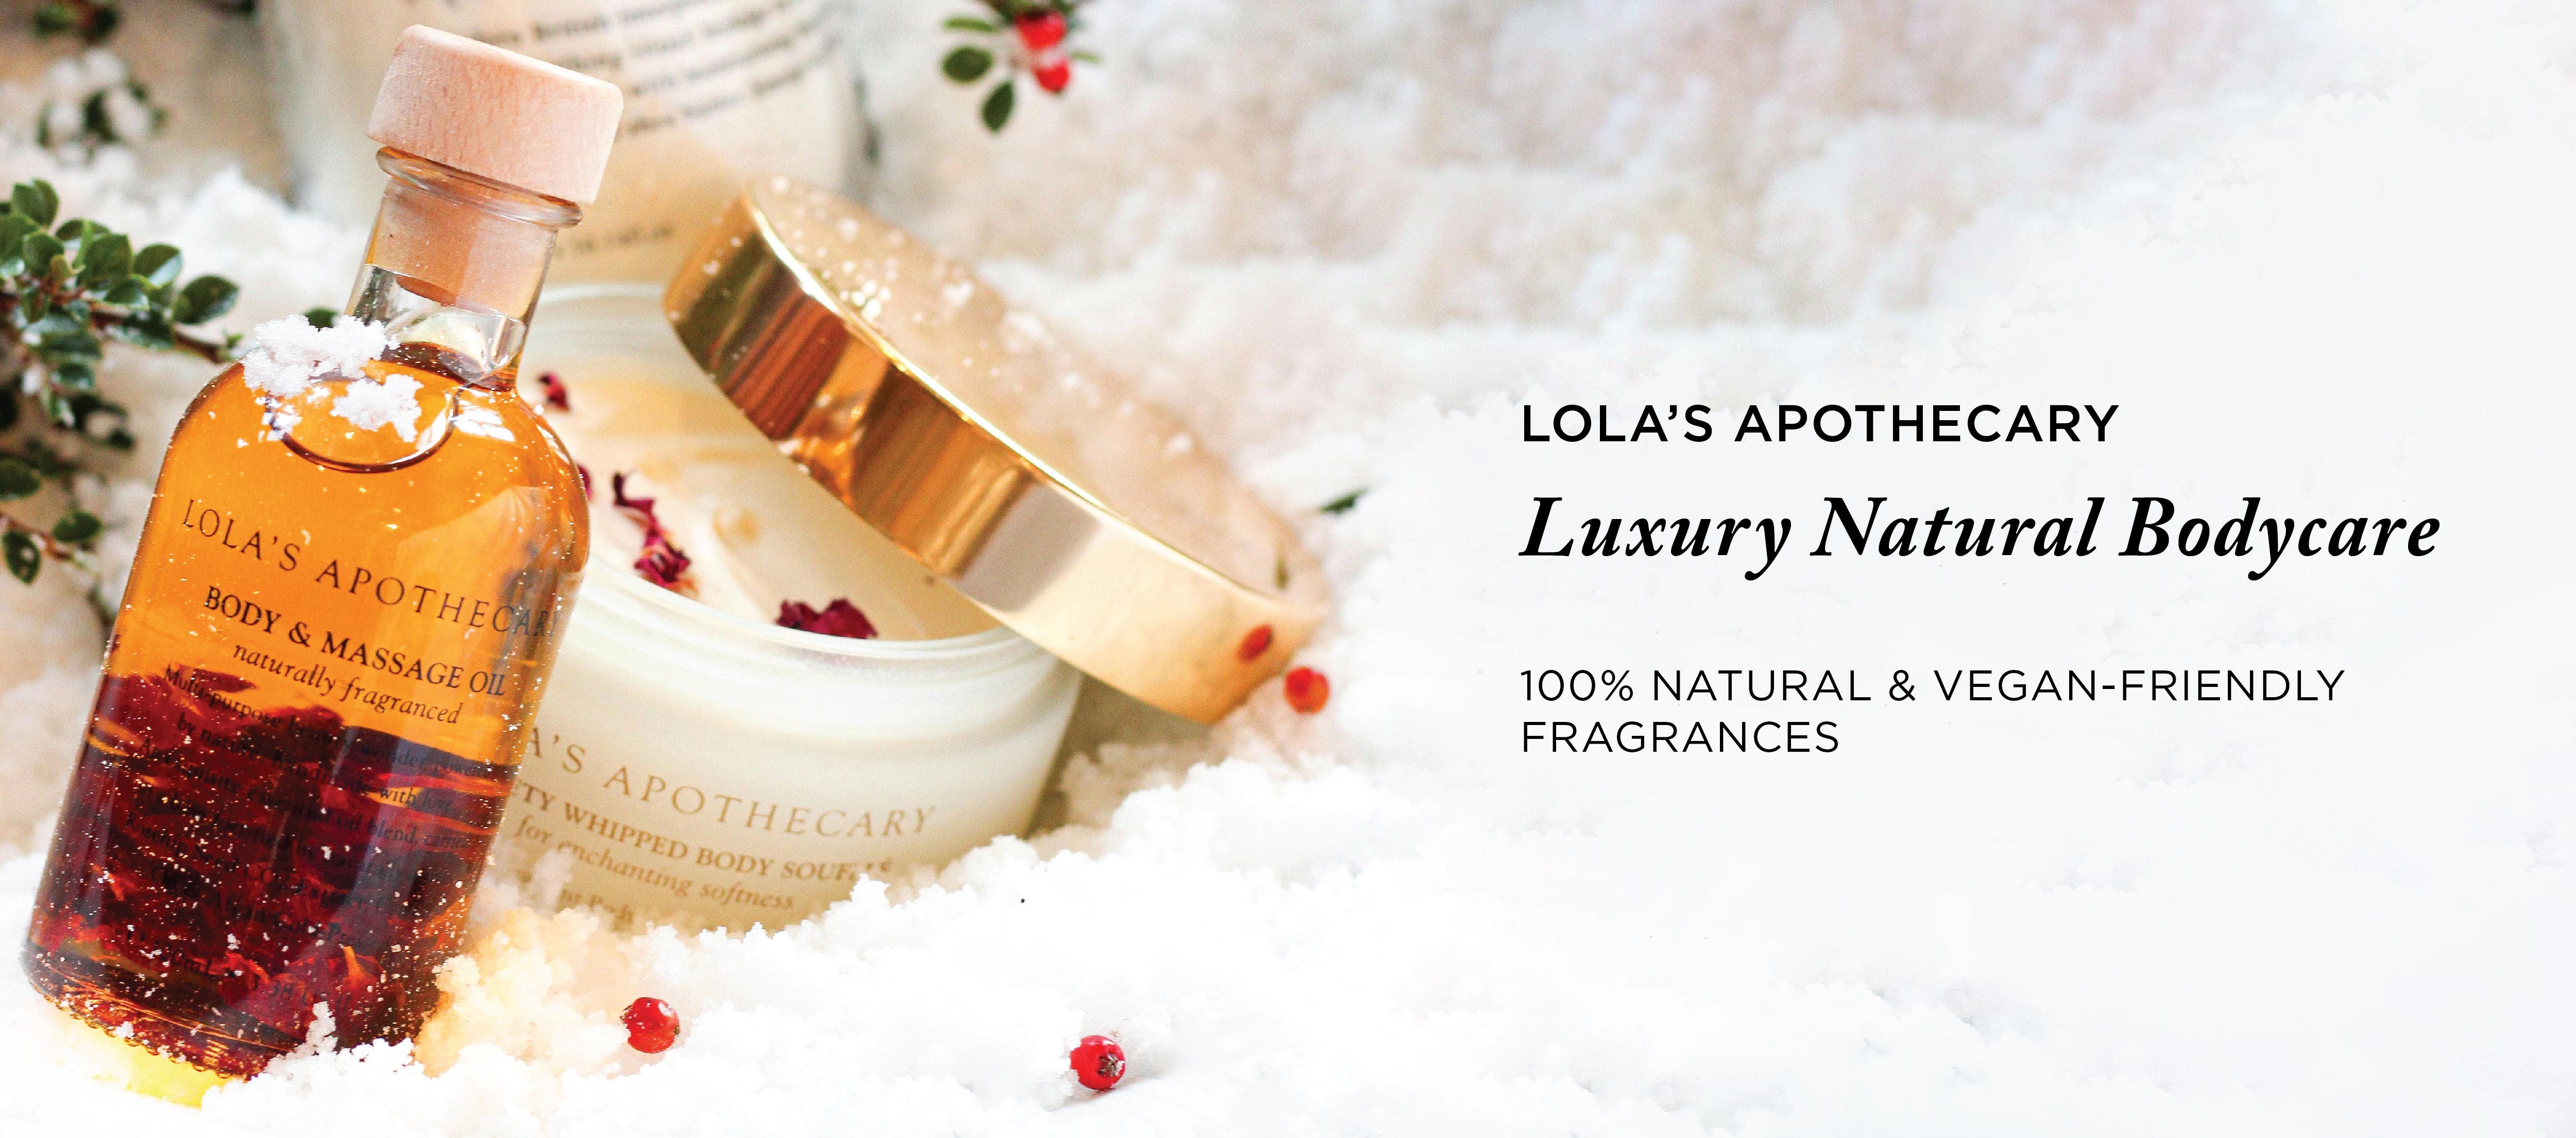 Lola's Apothecary Luxury Natural Bodycare